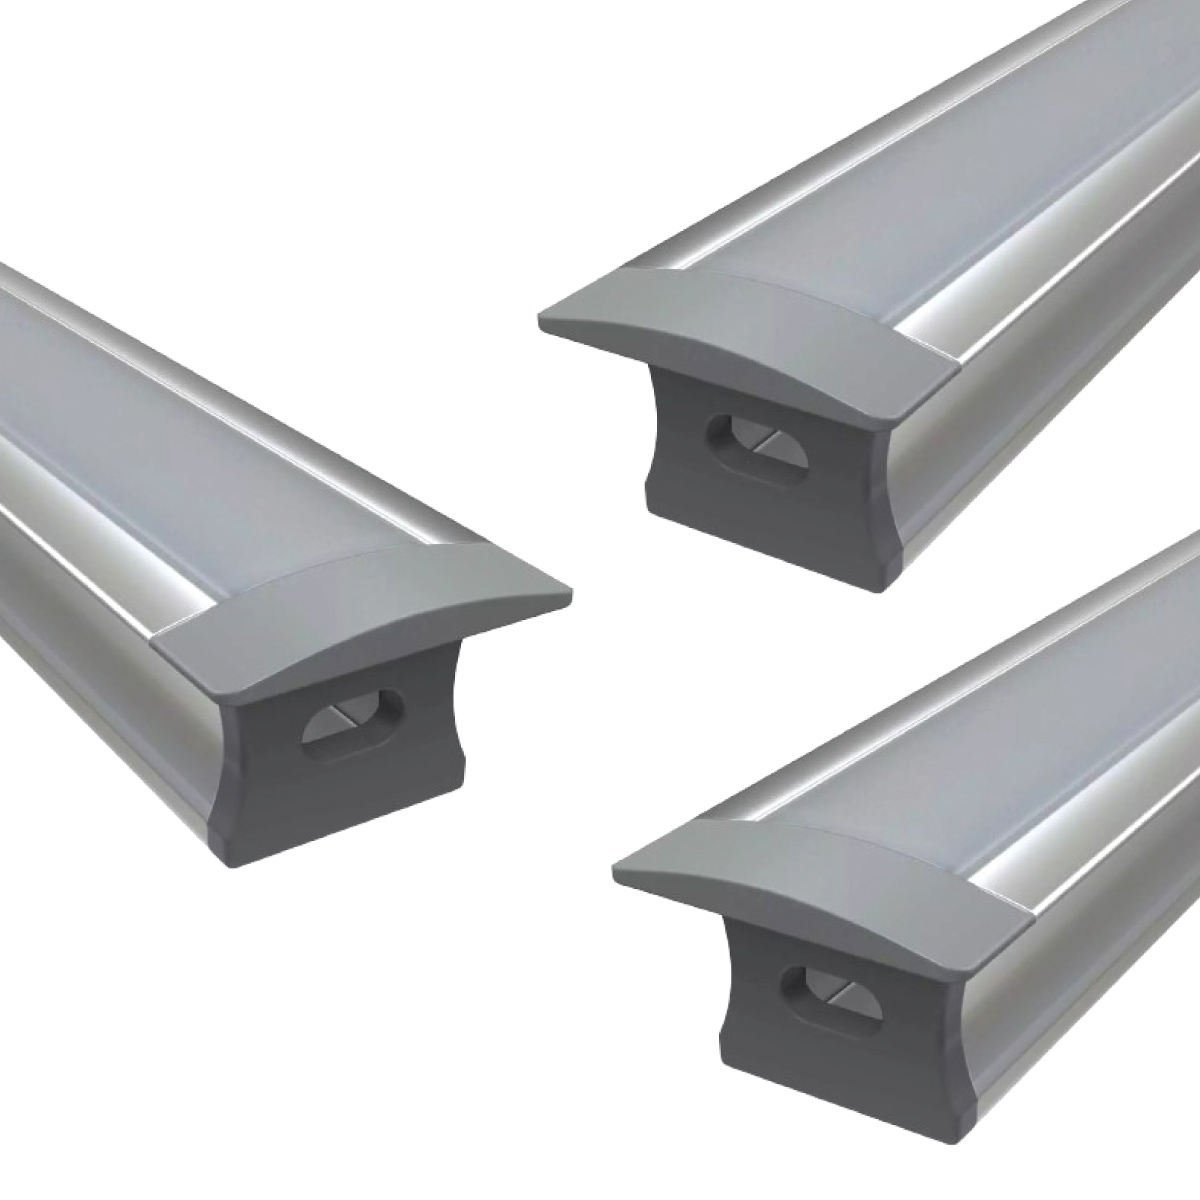 View Pack of 3 Recessed Mounted Aluminium LED Profiles 2M information